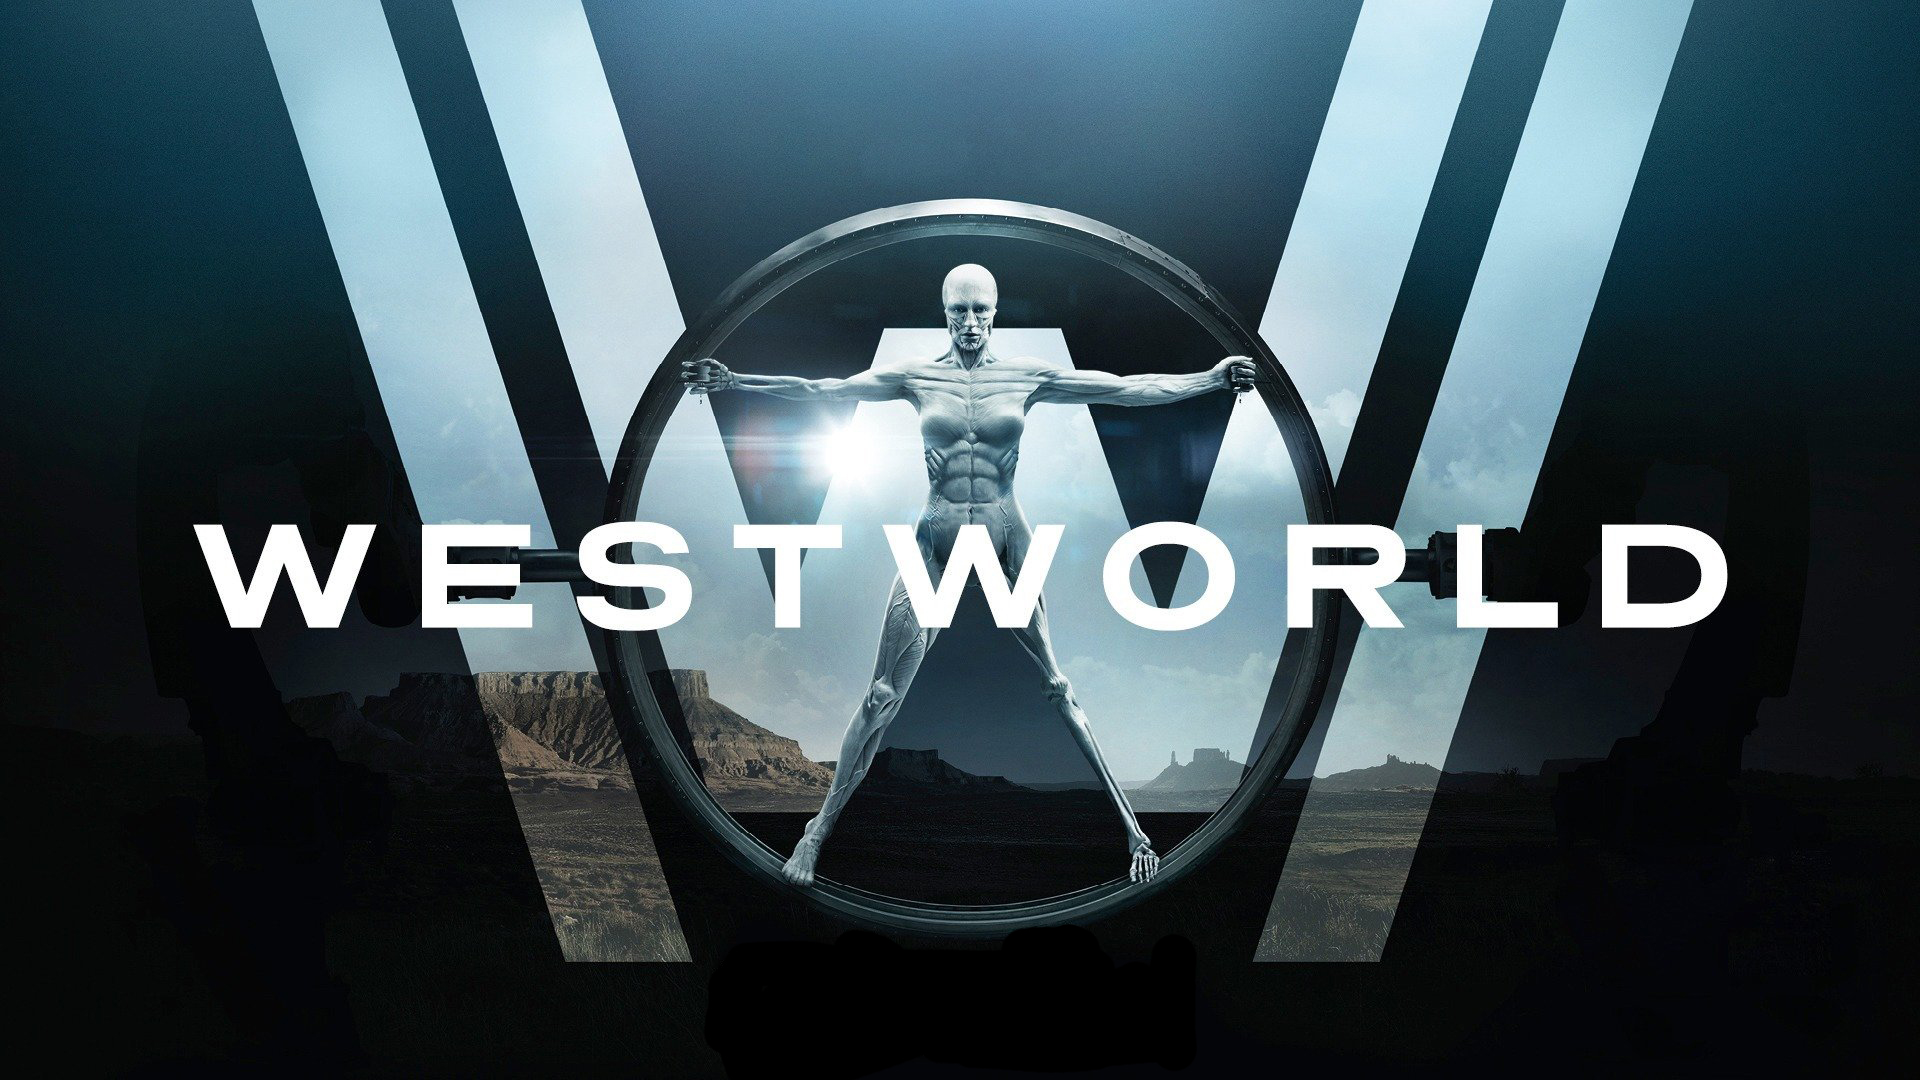 Wsetworld poster